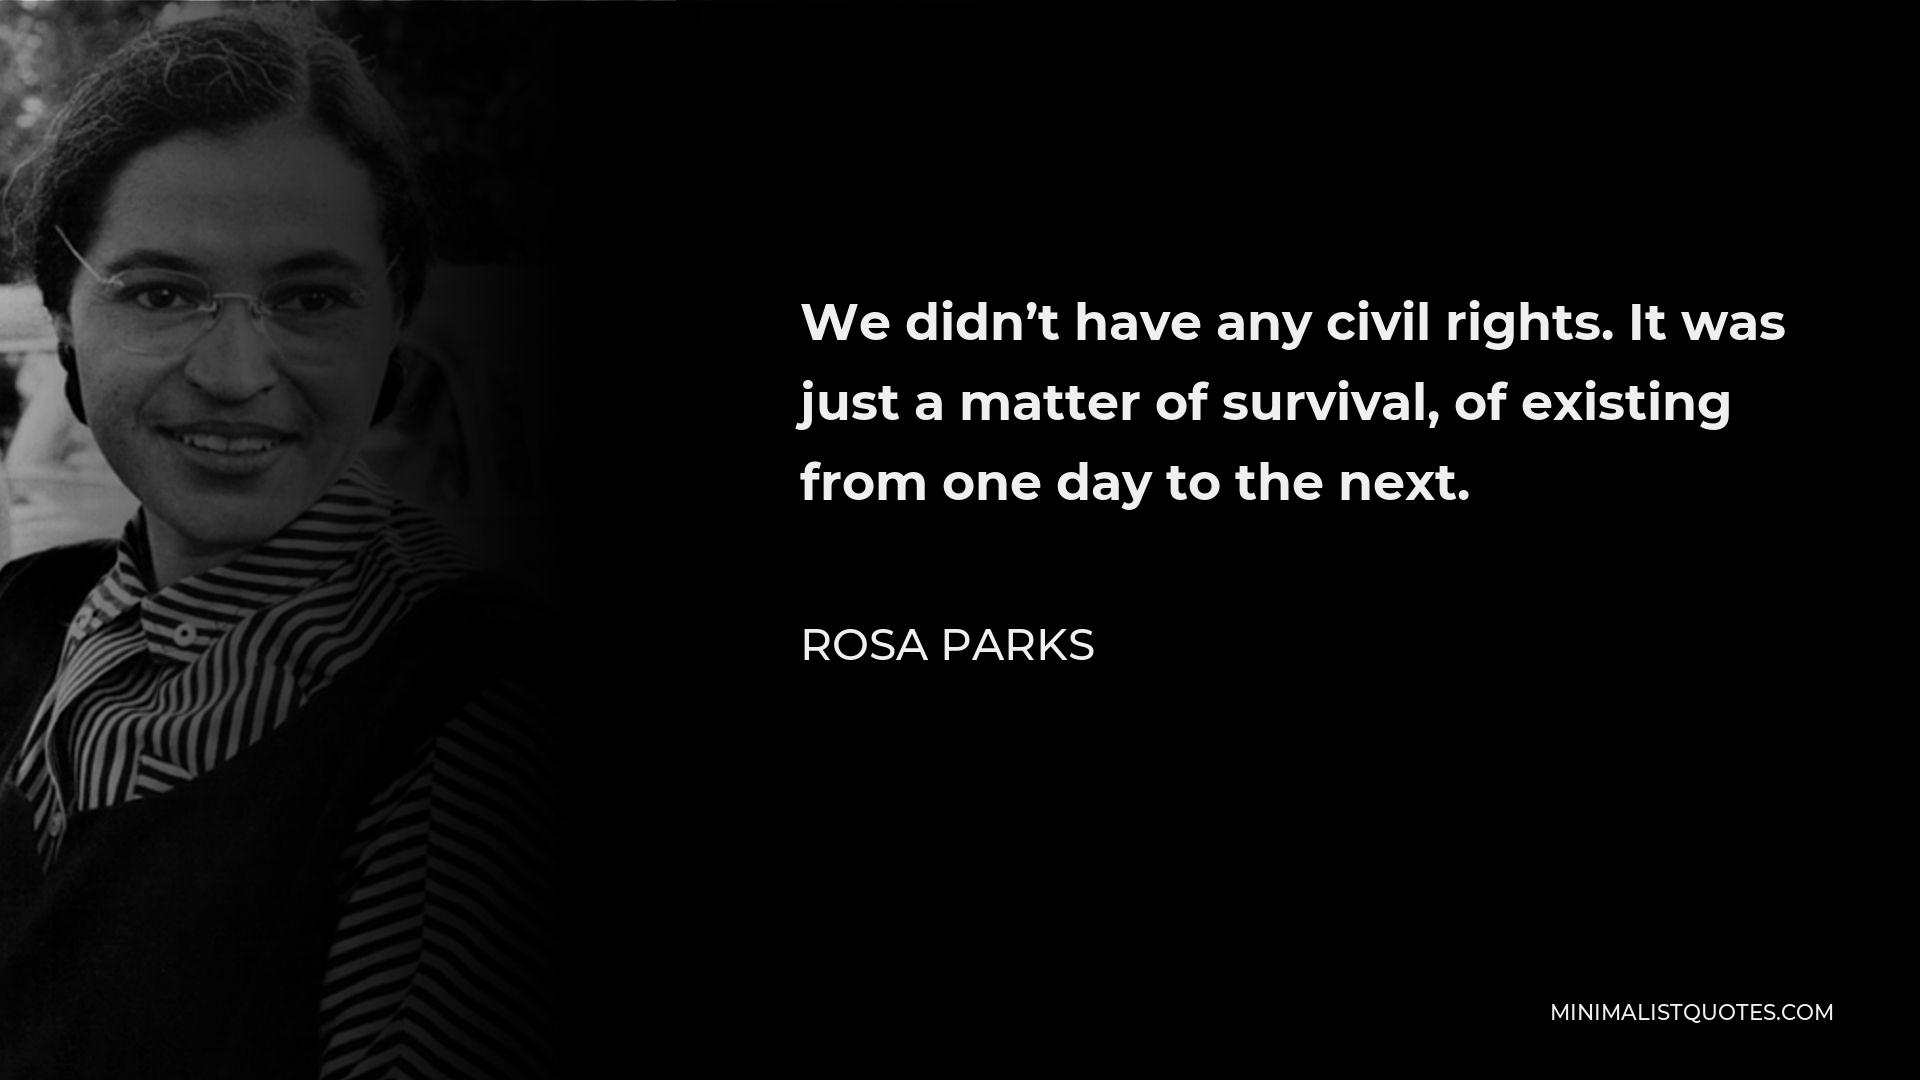 Rosa Parks Quote - We didn’t have any civil rights. It was just a matter of survival, of existing from one day to the next.